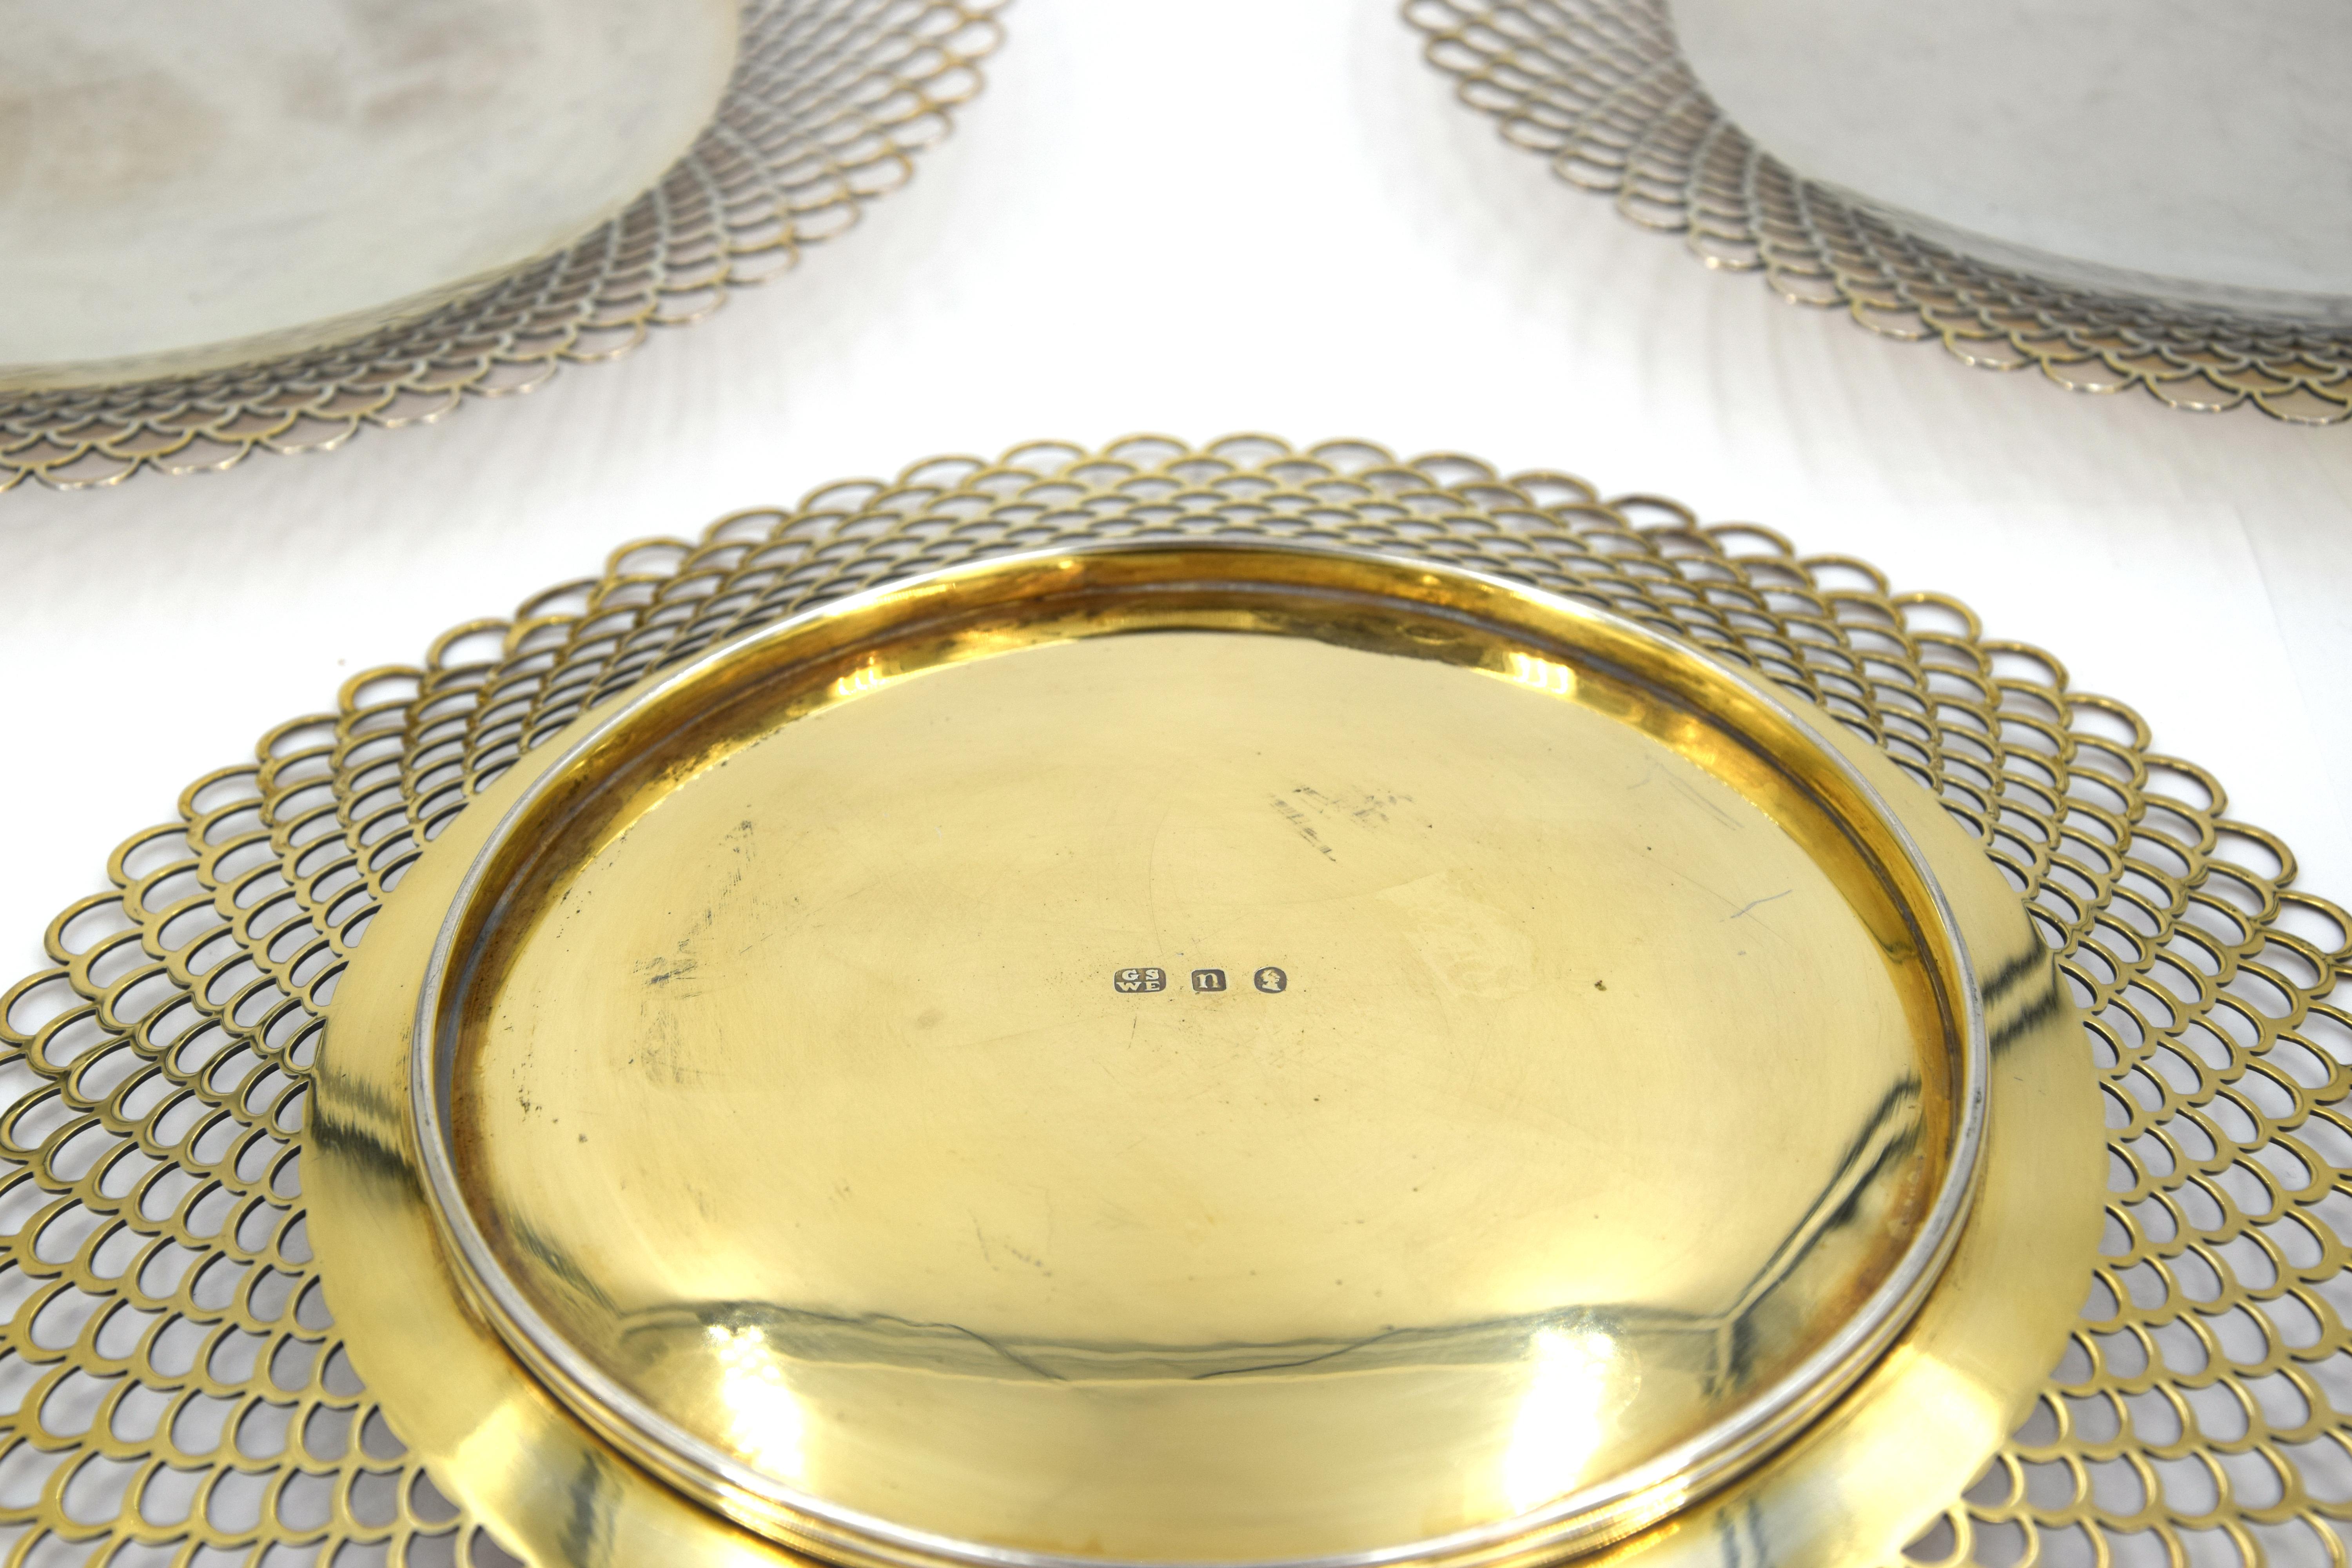 Vintage silver plates with beautiful drilled decoration on the border. Marked on the base. 19th century.

This artwork is shipped from Italy. Under existing legislation, any artwork in Italy created over 70 years ago by an artist who has died